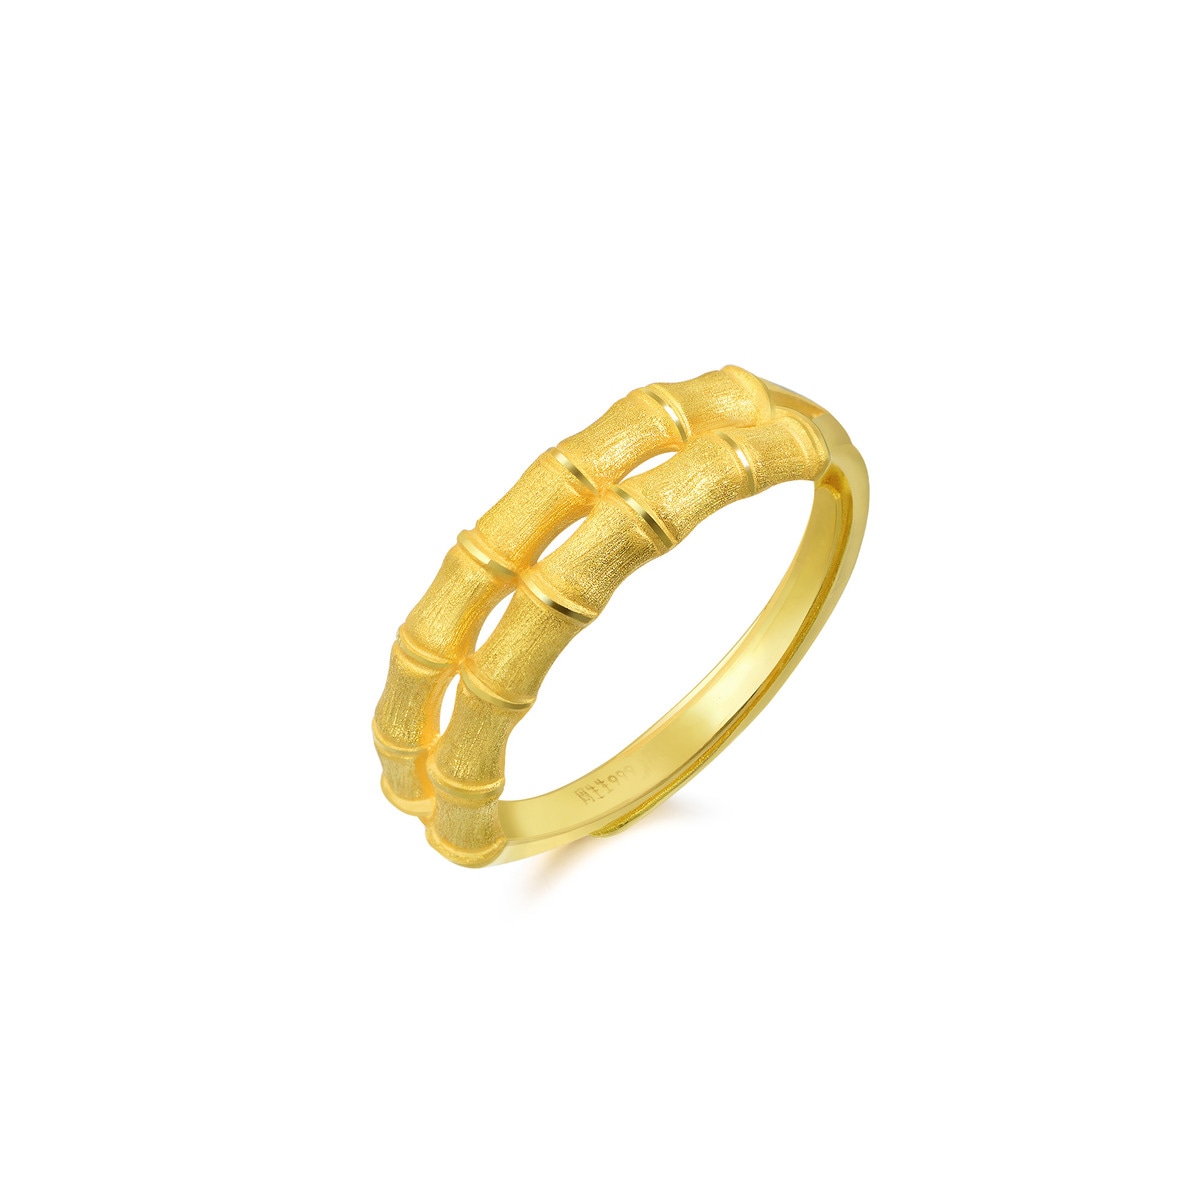 Chinese Wedding Collection 999.9 Gold Ring - 90351R | Chow Sang Sang ...